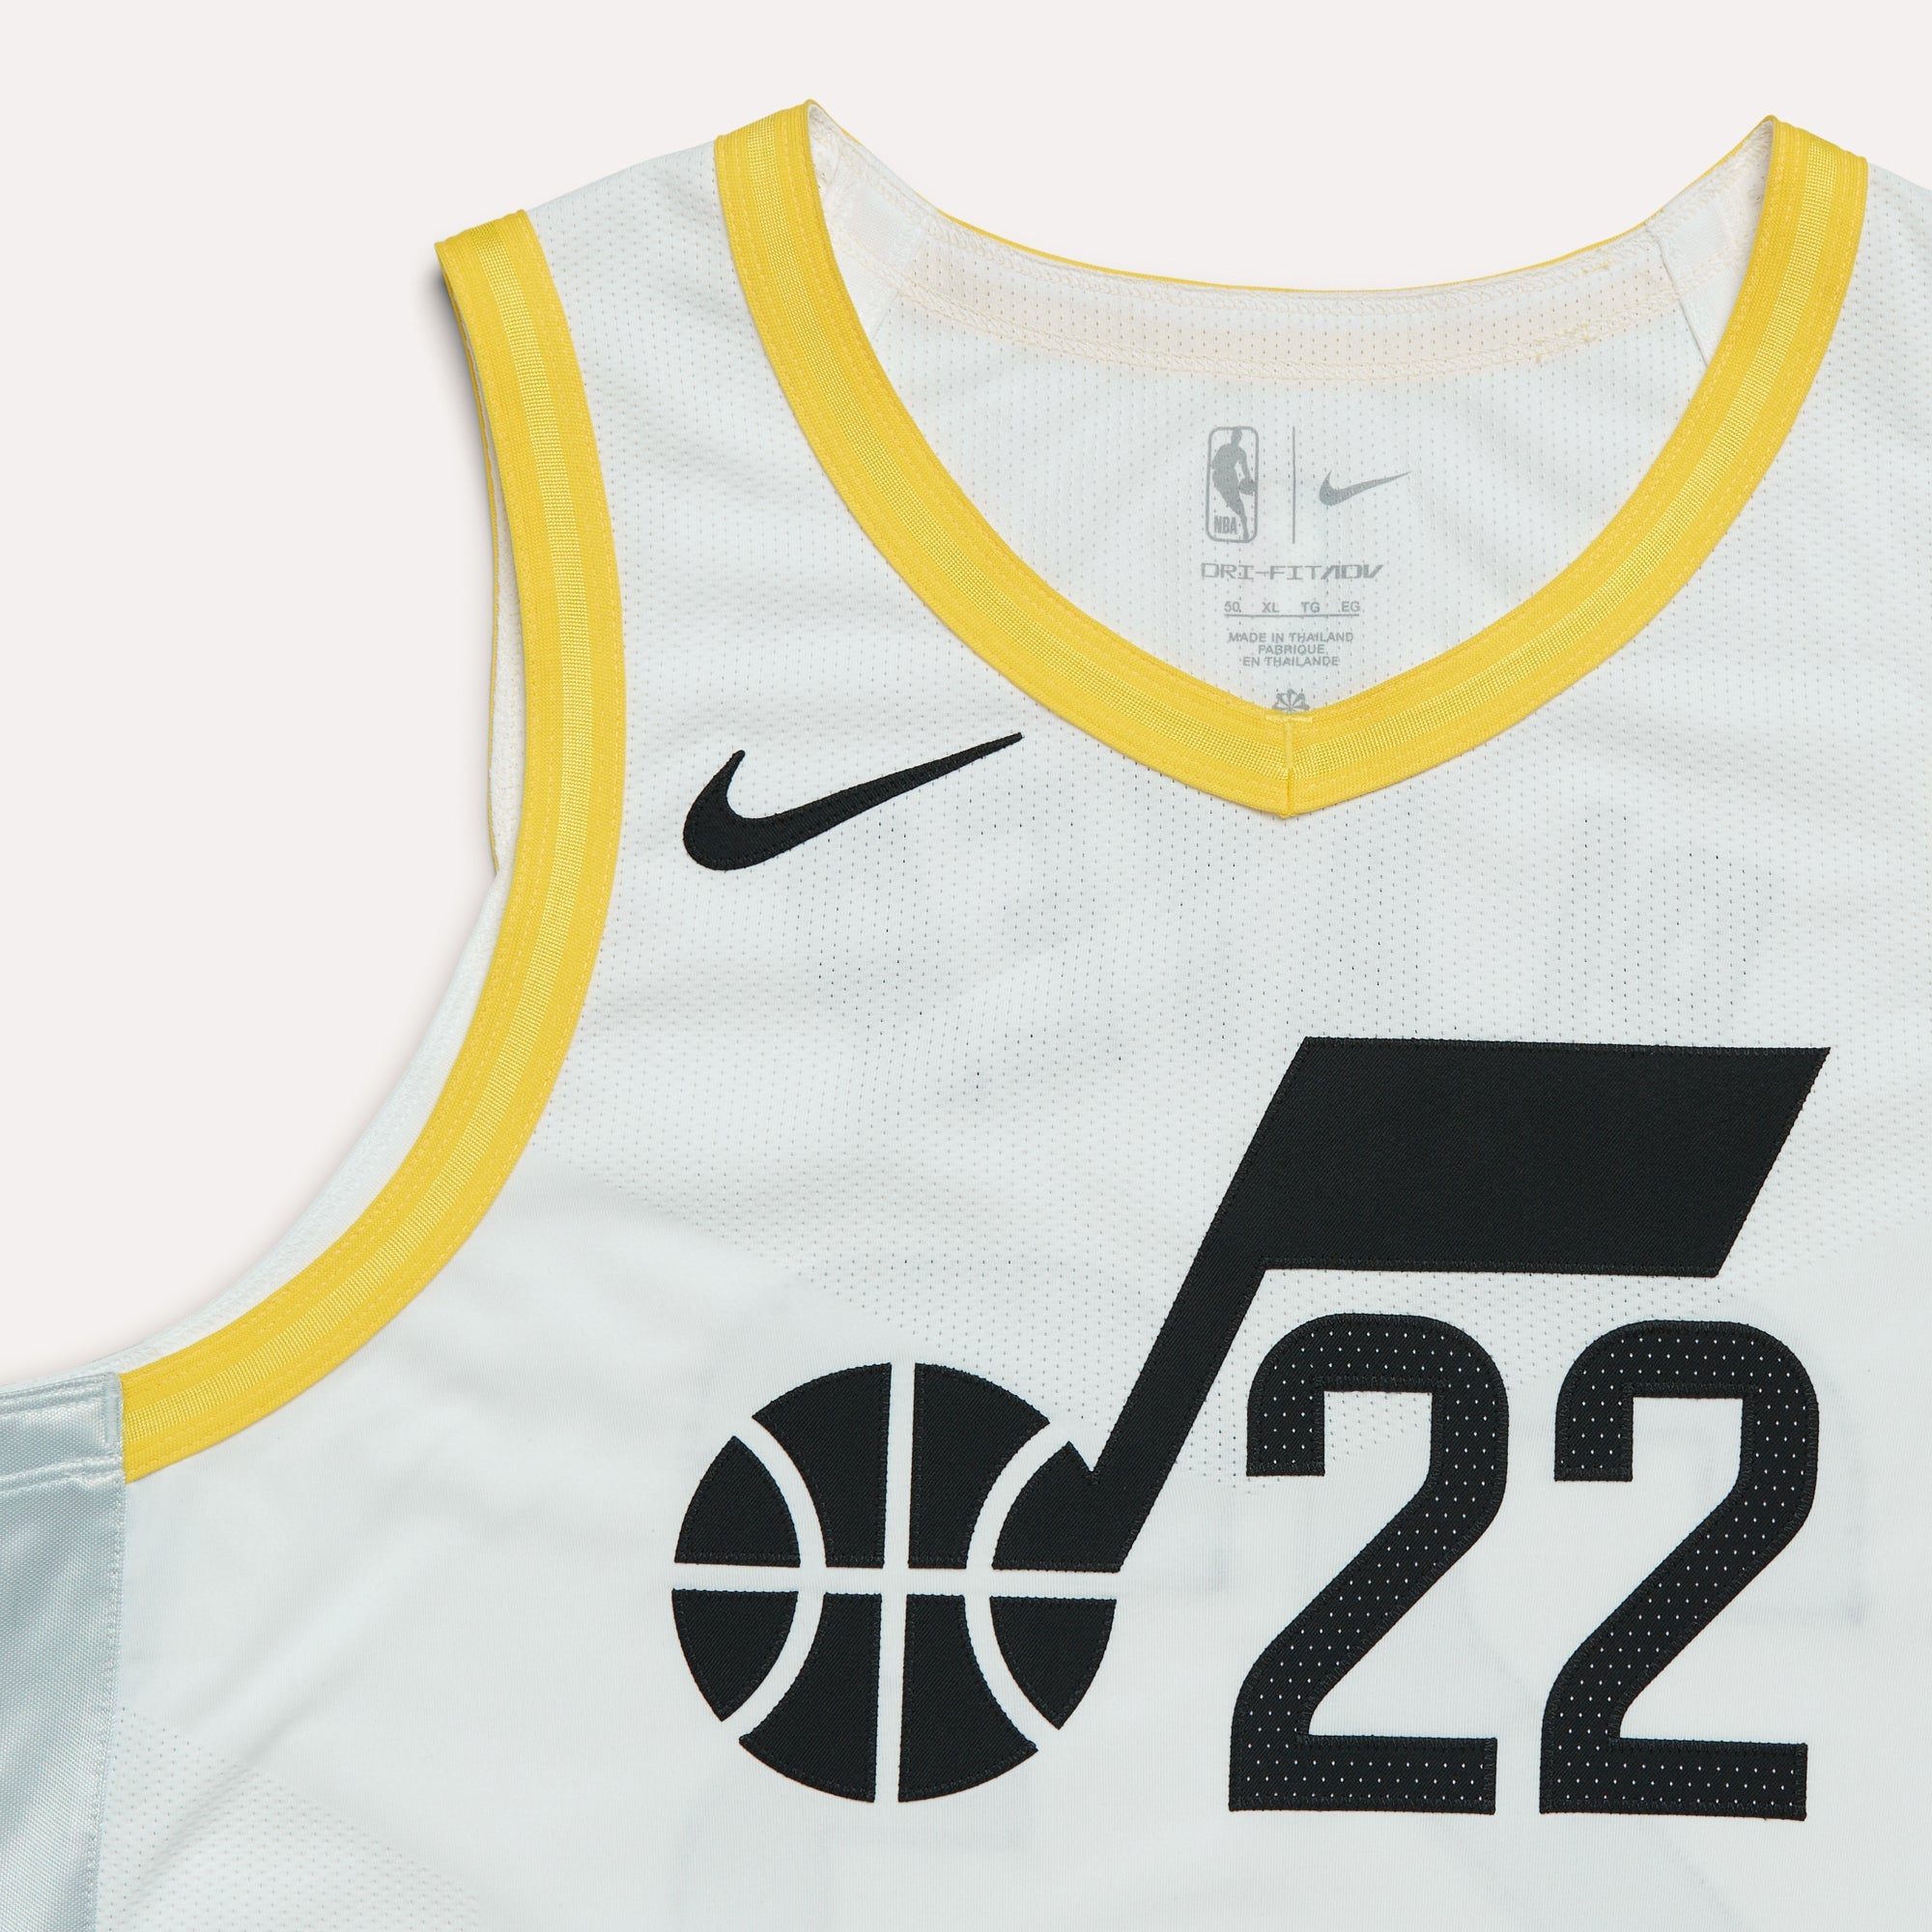 A zoomed in view of the White Nike Association jersey.